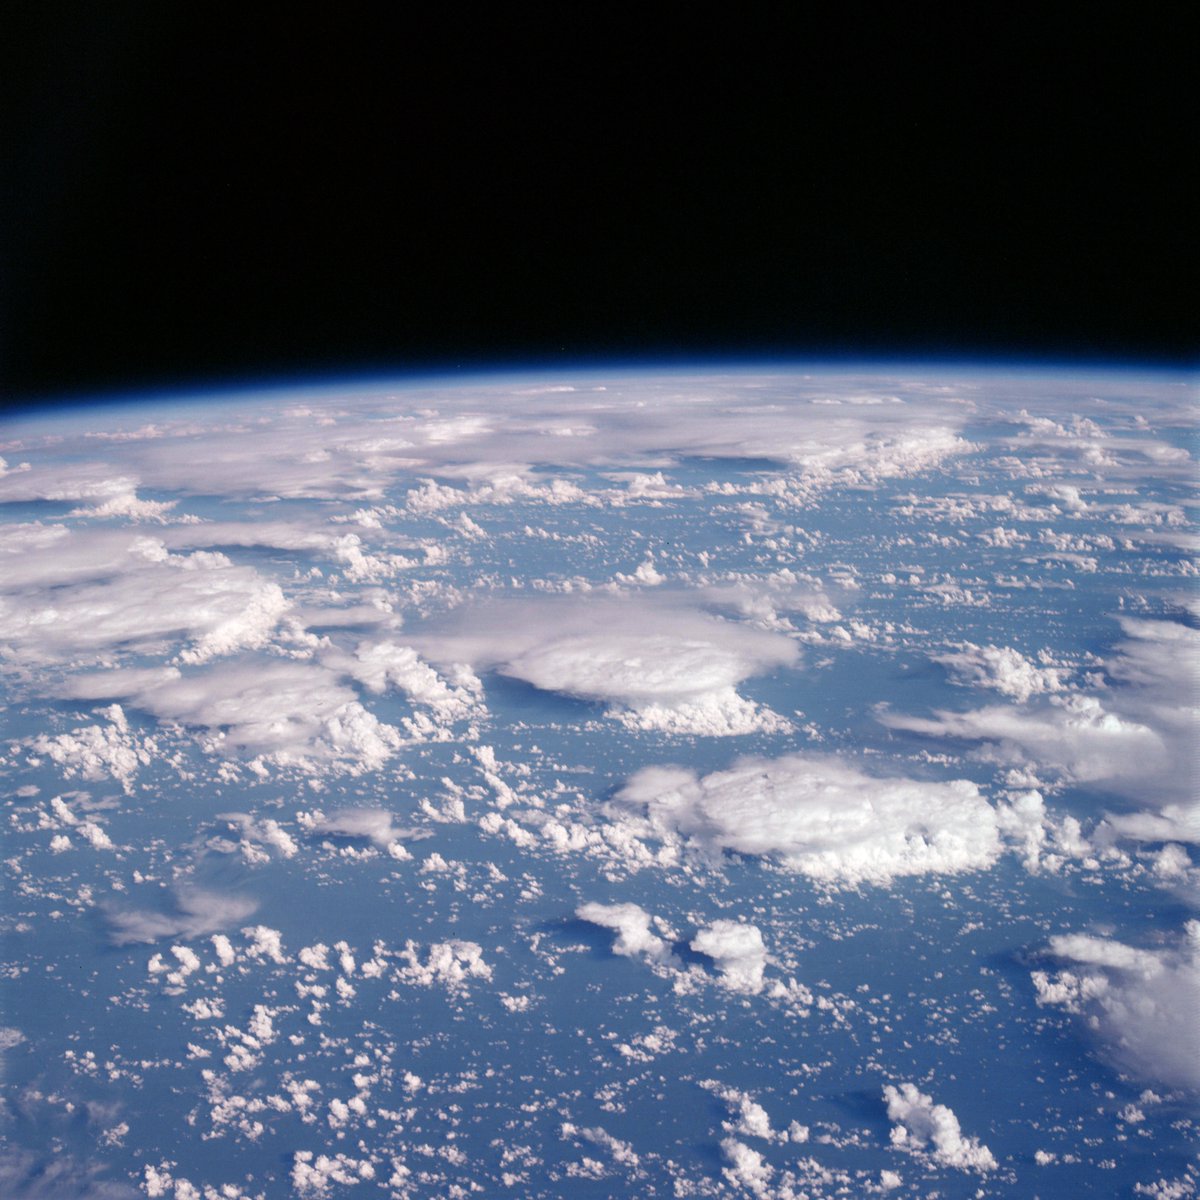 Clouds photographed from Earth orbit during Apollo 7 in October 1968. 70mm film photograph, NASA ID# AS07-7-1825